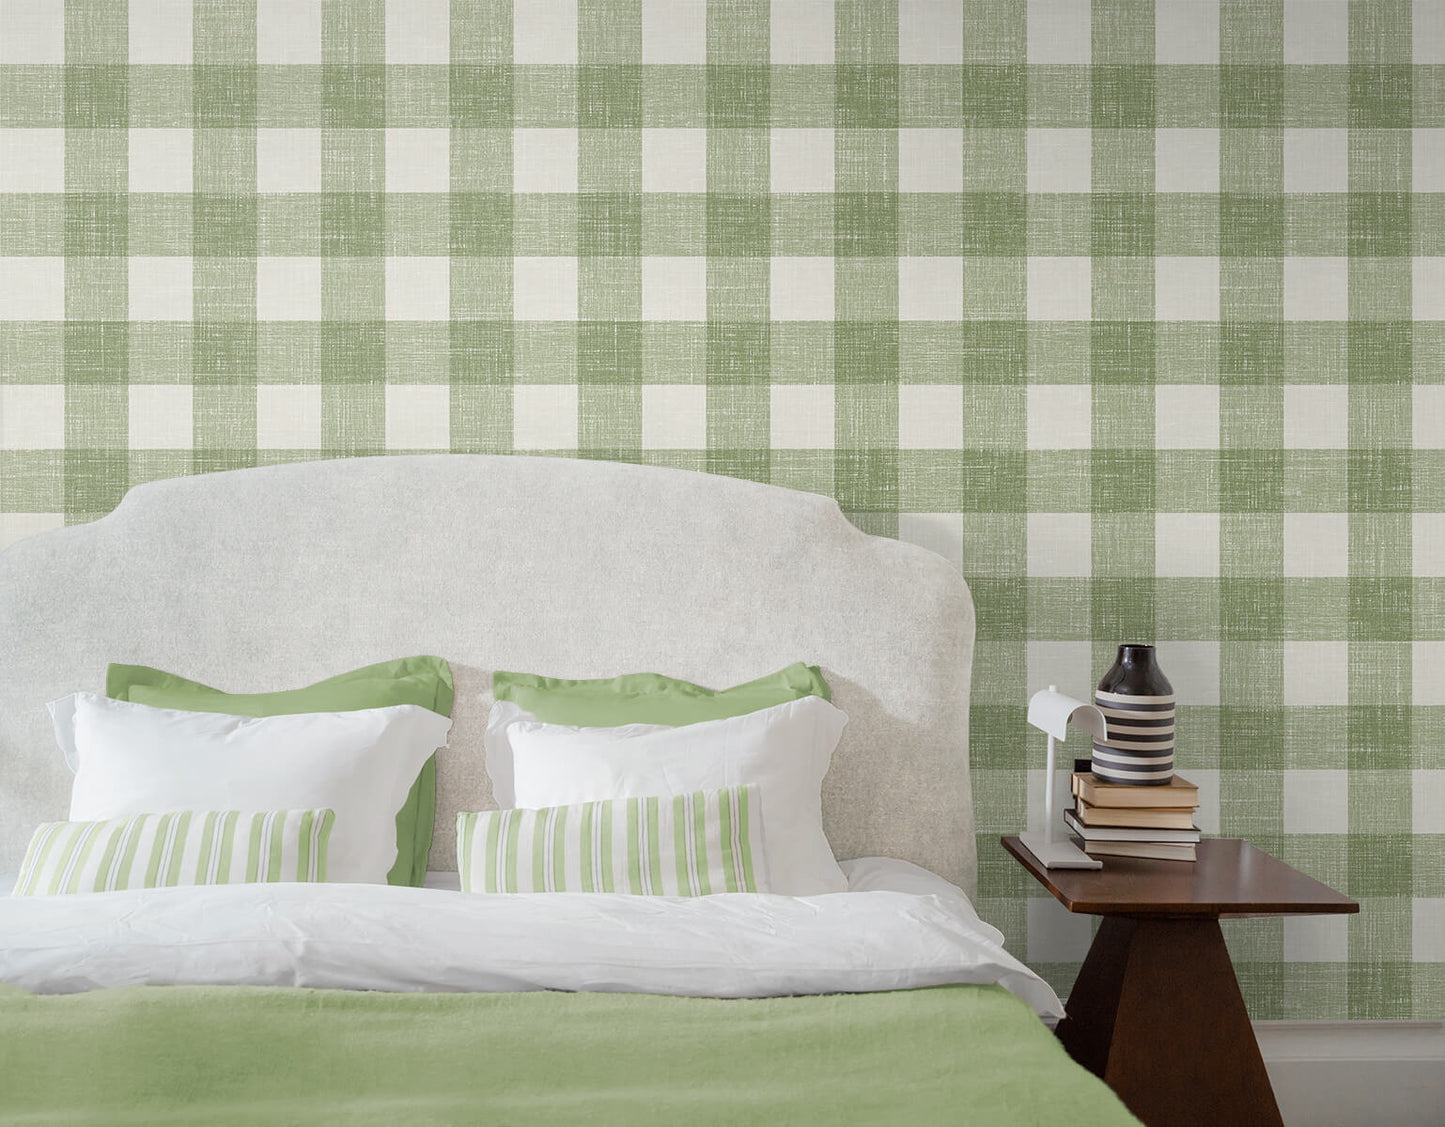 Seabrook French Country Bebe Gingham Wallpaper - Herb